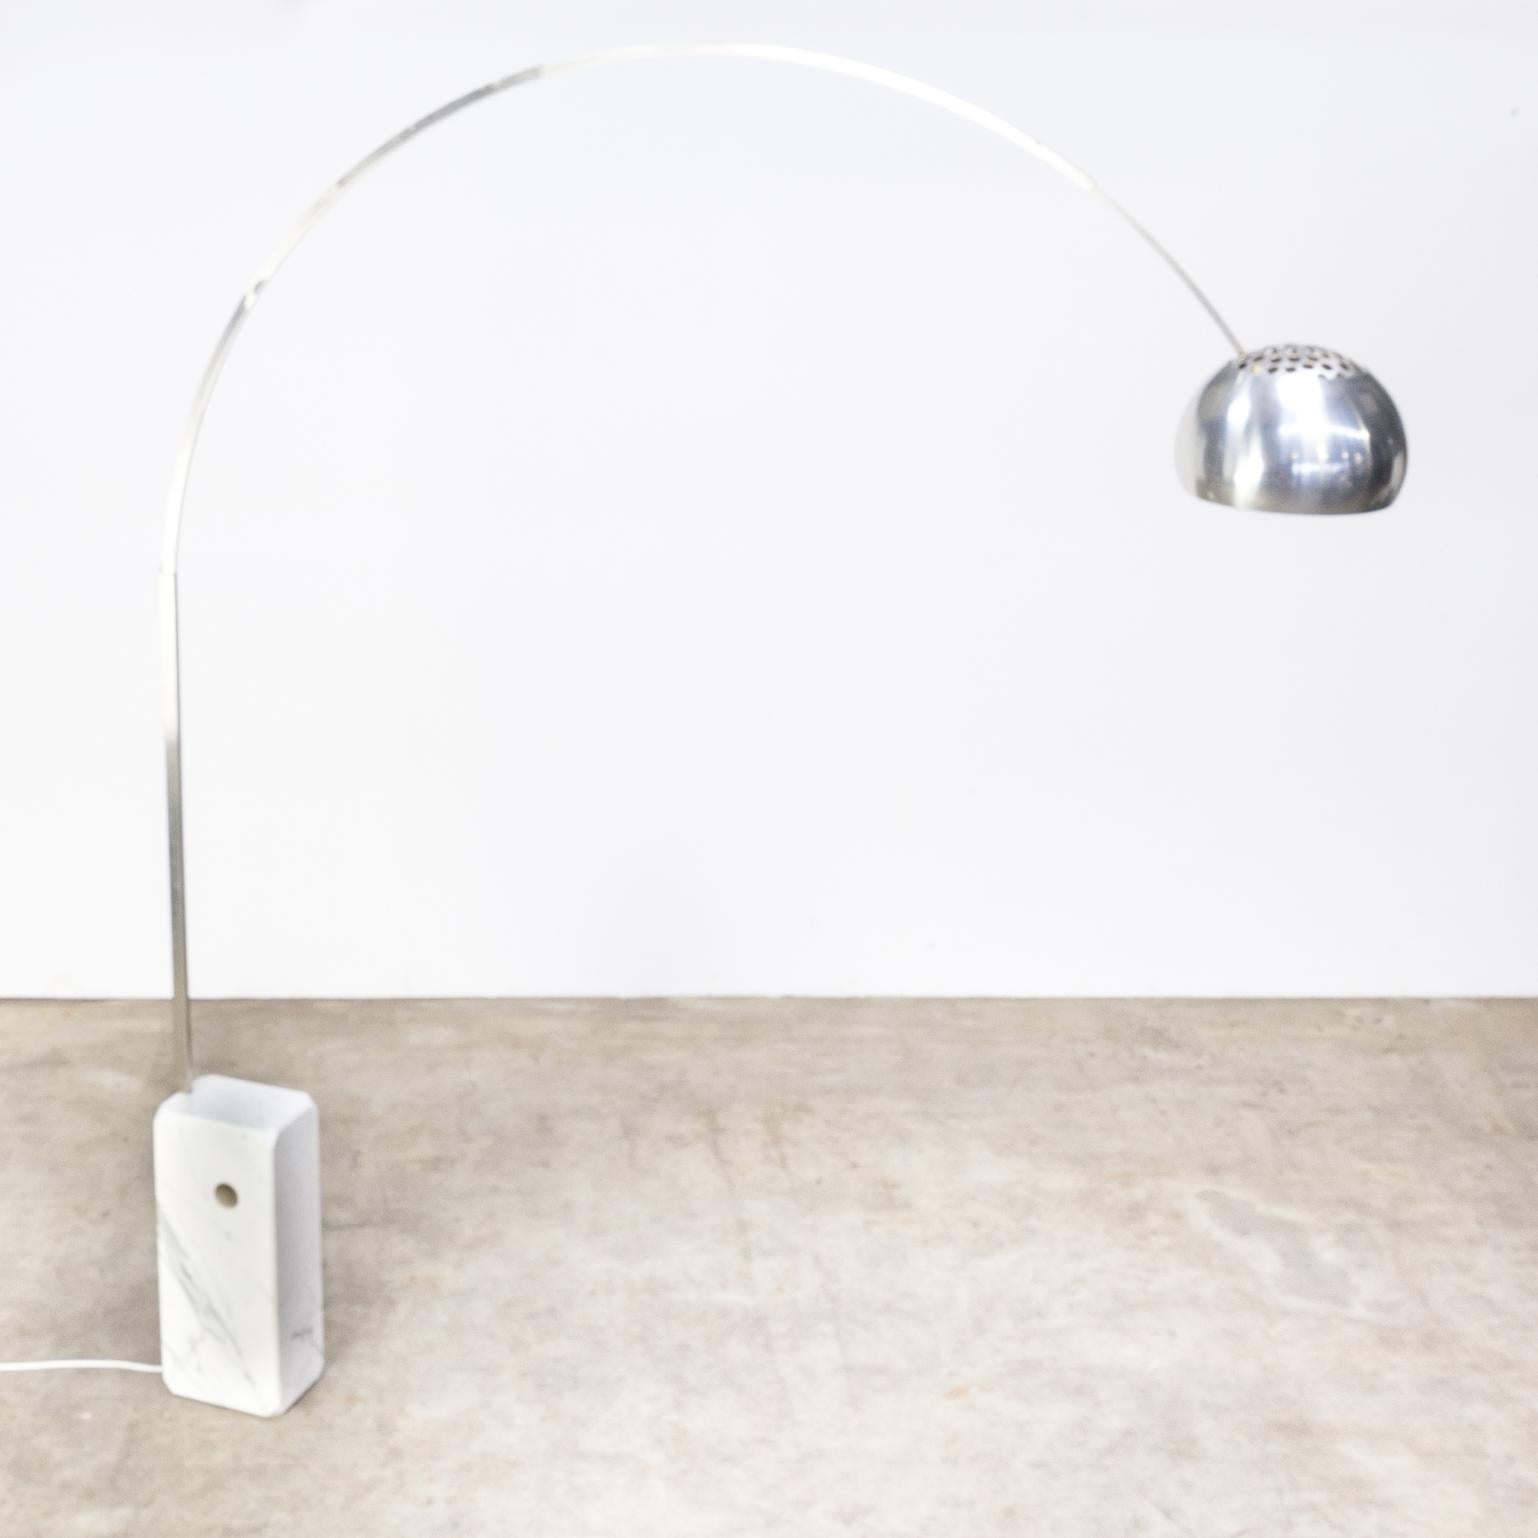 1960s Achille Castiglioni ‘arco’ floor lamp for Flos. Good and working condition consistent with age and use.